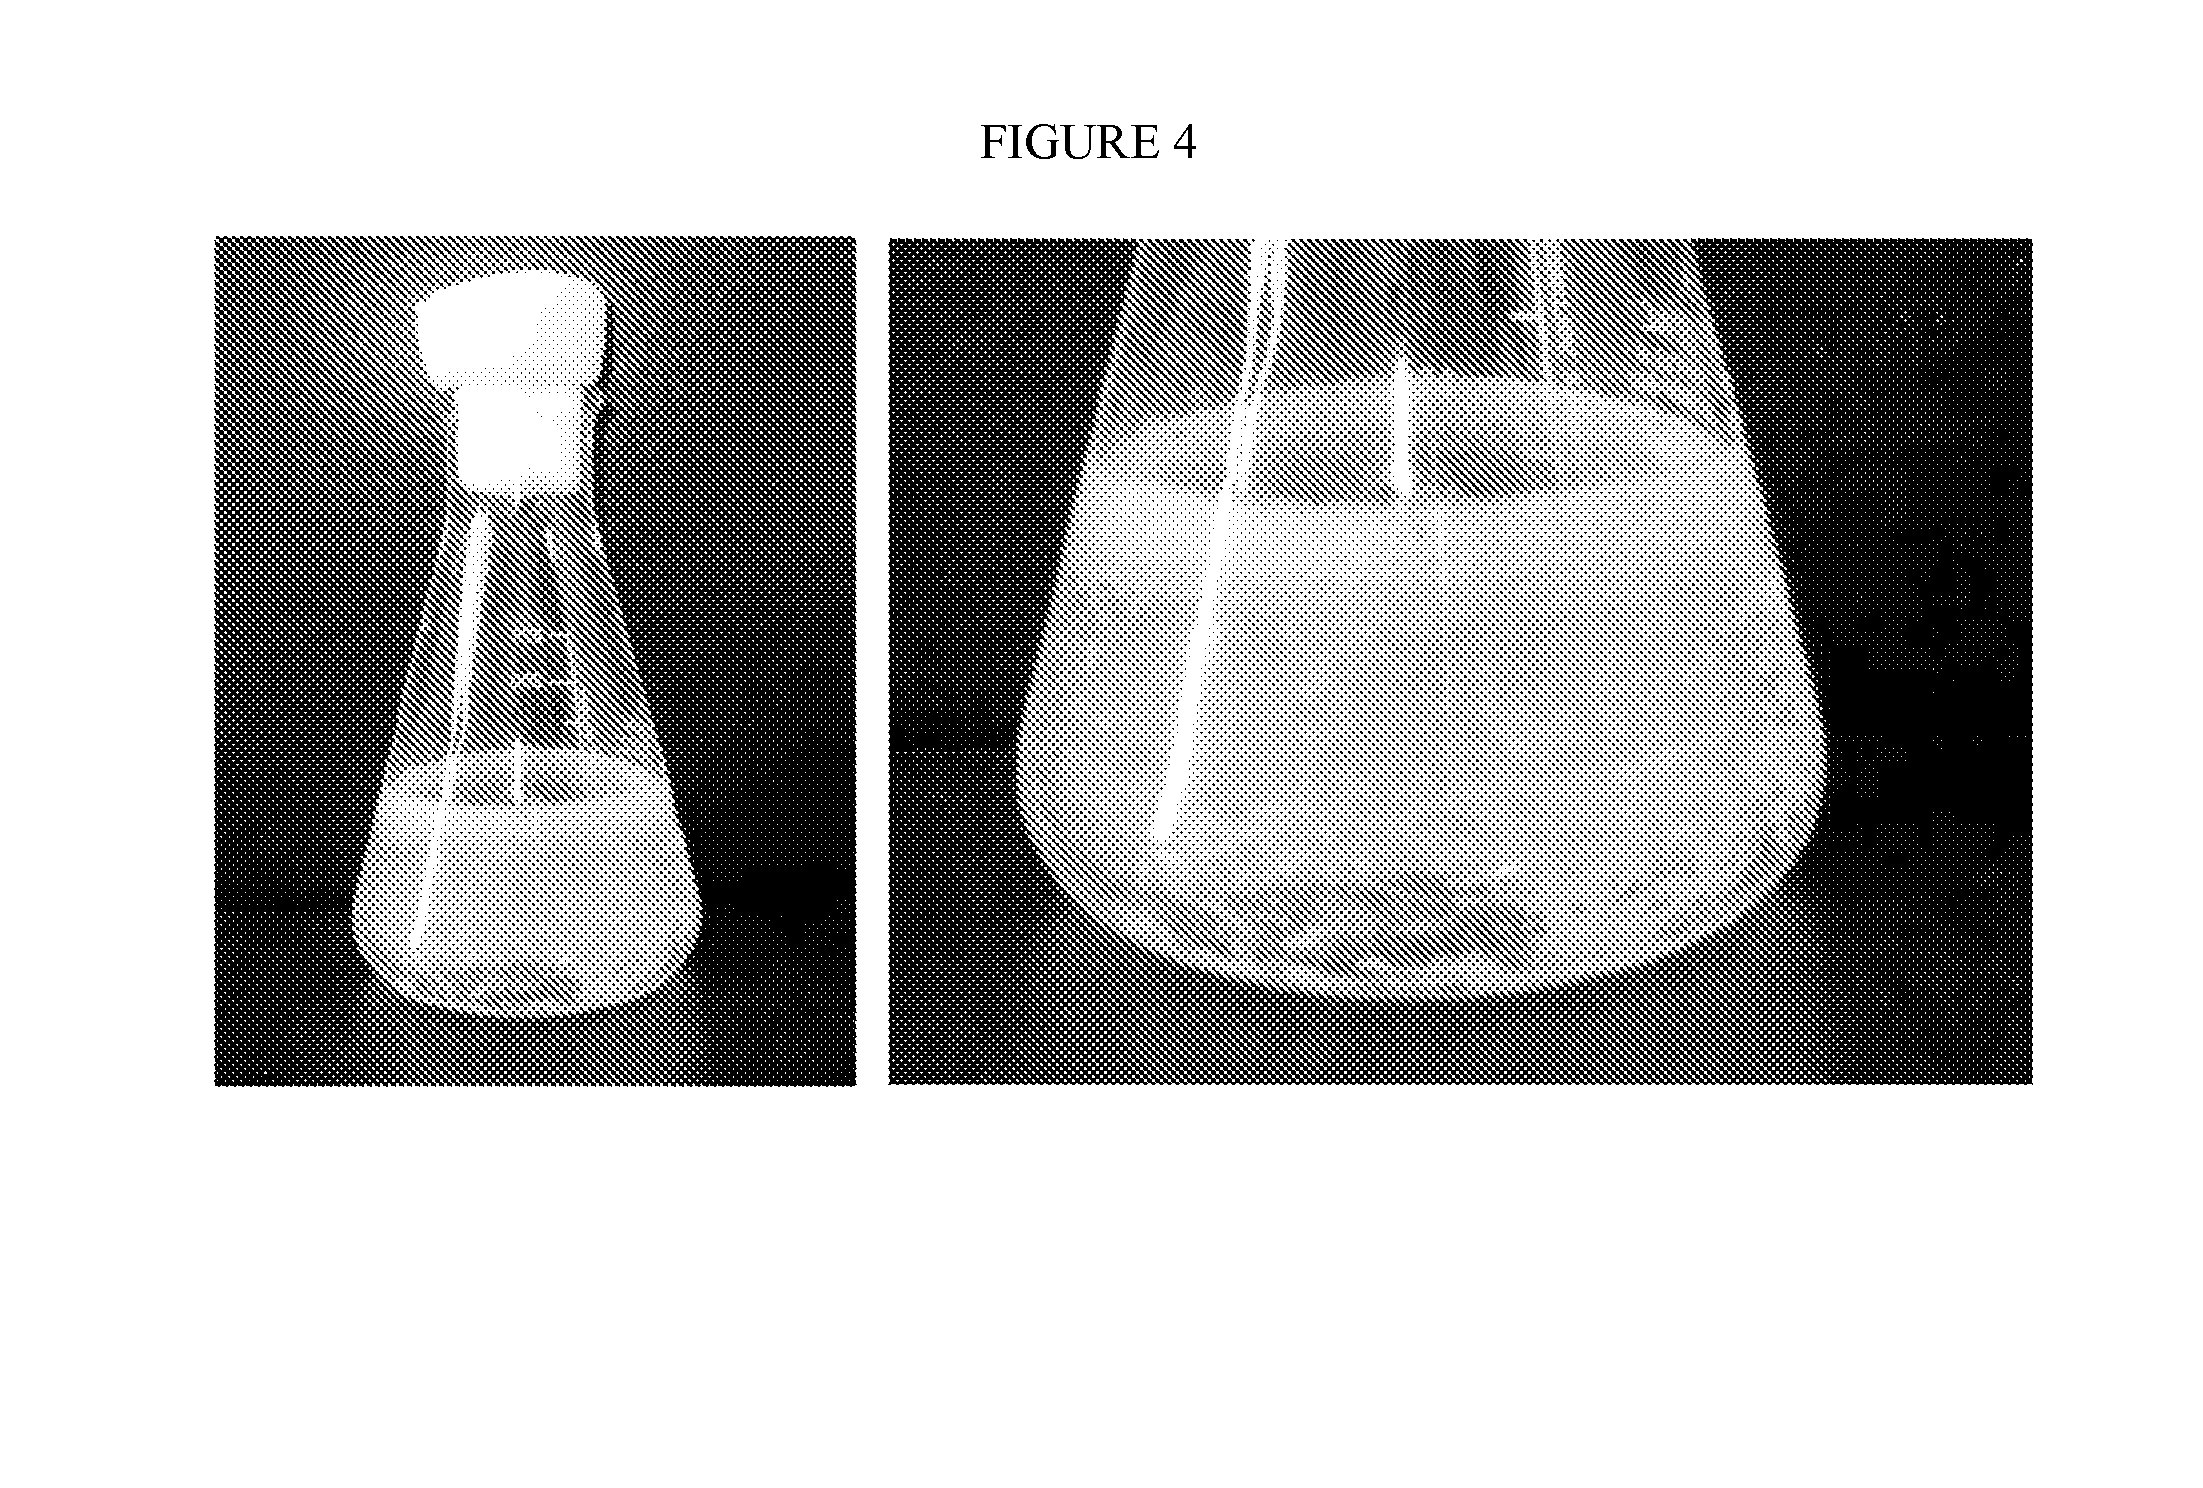 Bacteria and method for synthesizing fatty acids